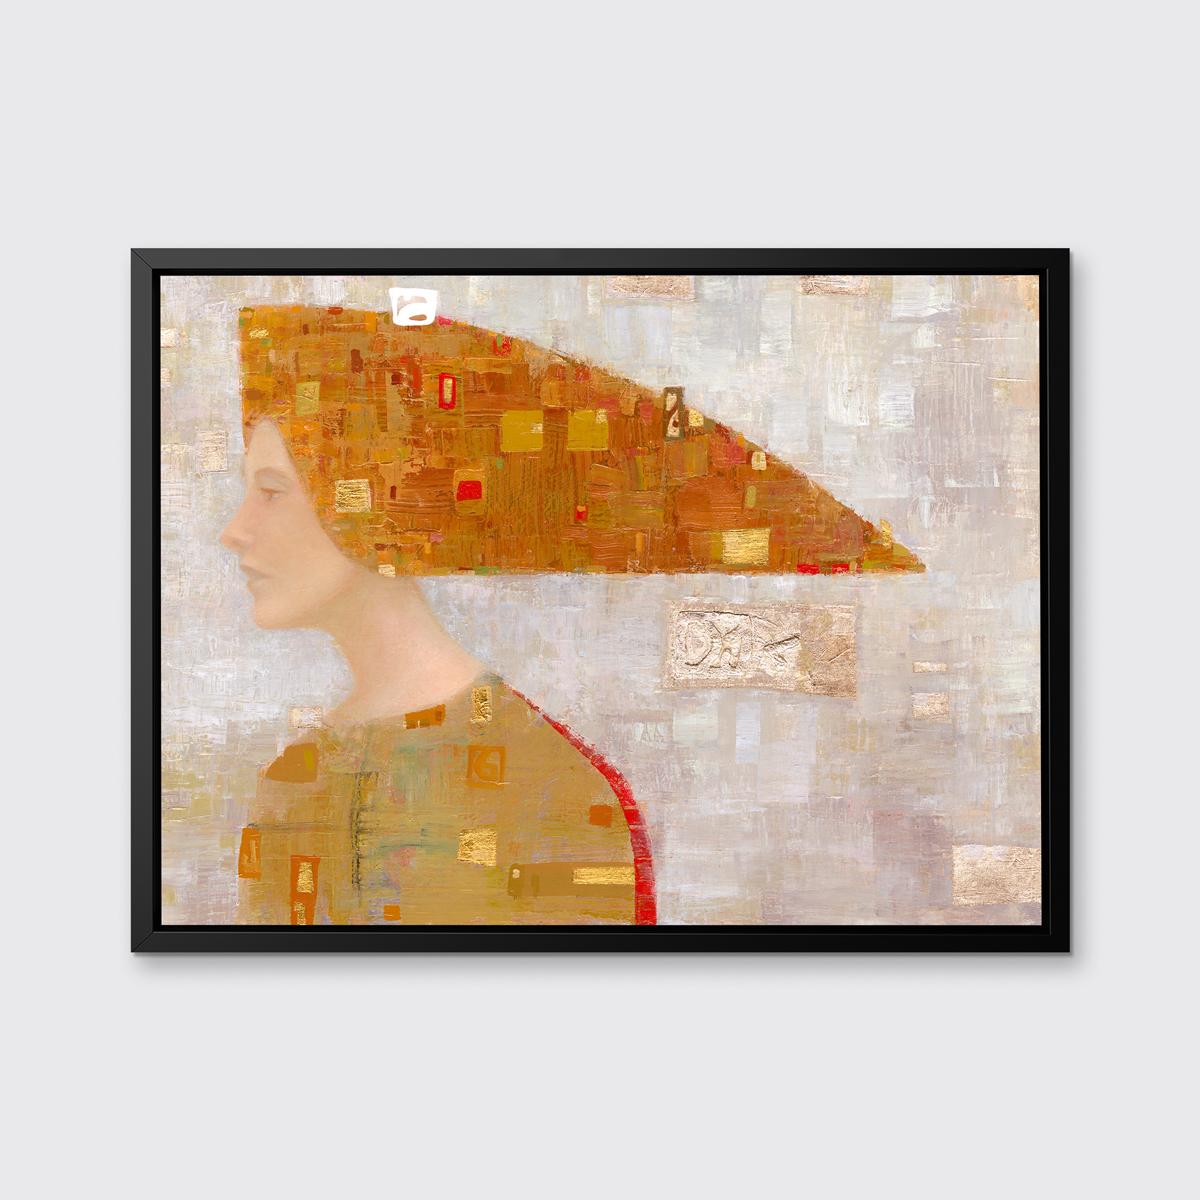 This abstract portrait limited edition print by Ned Martin blends the artist's signature abstract style with portraiture that is reminiscent of the Old Masters. The softly-executed face and neck of the woman in this painting is contrasted by